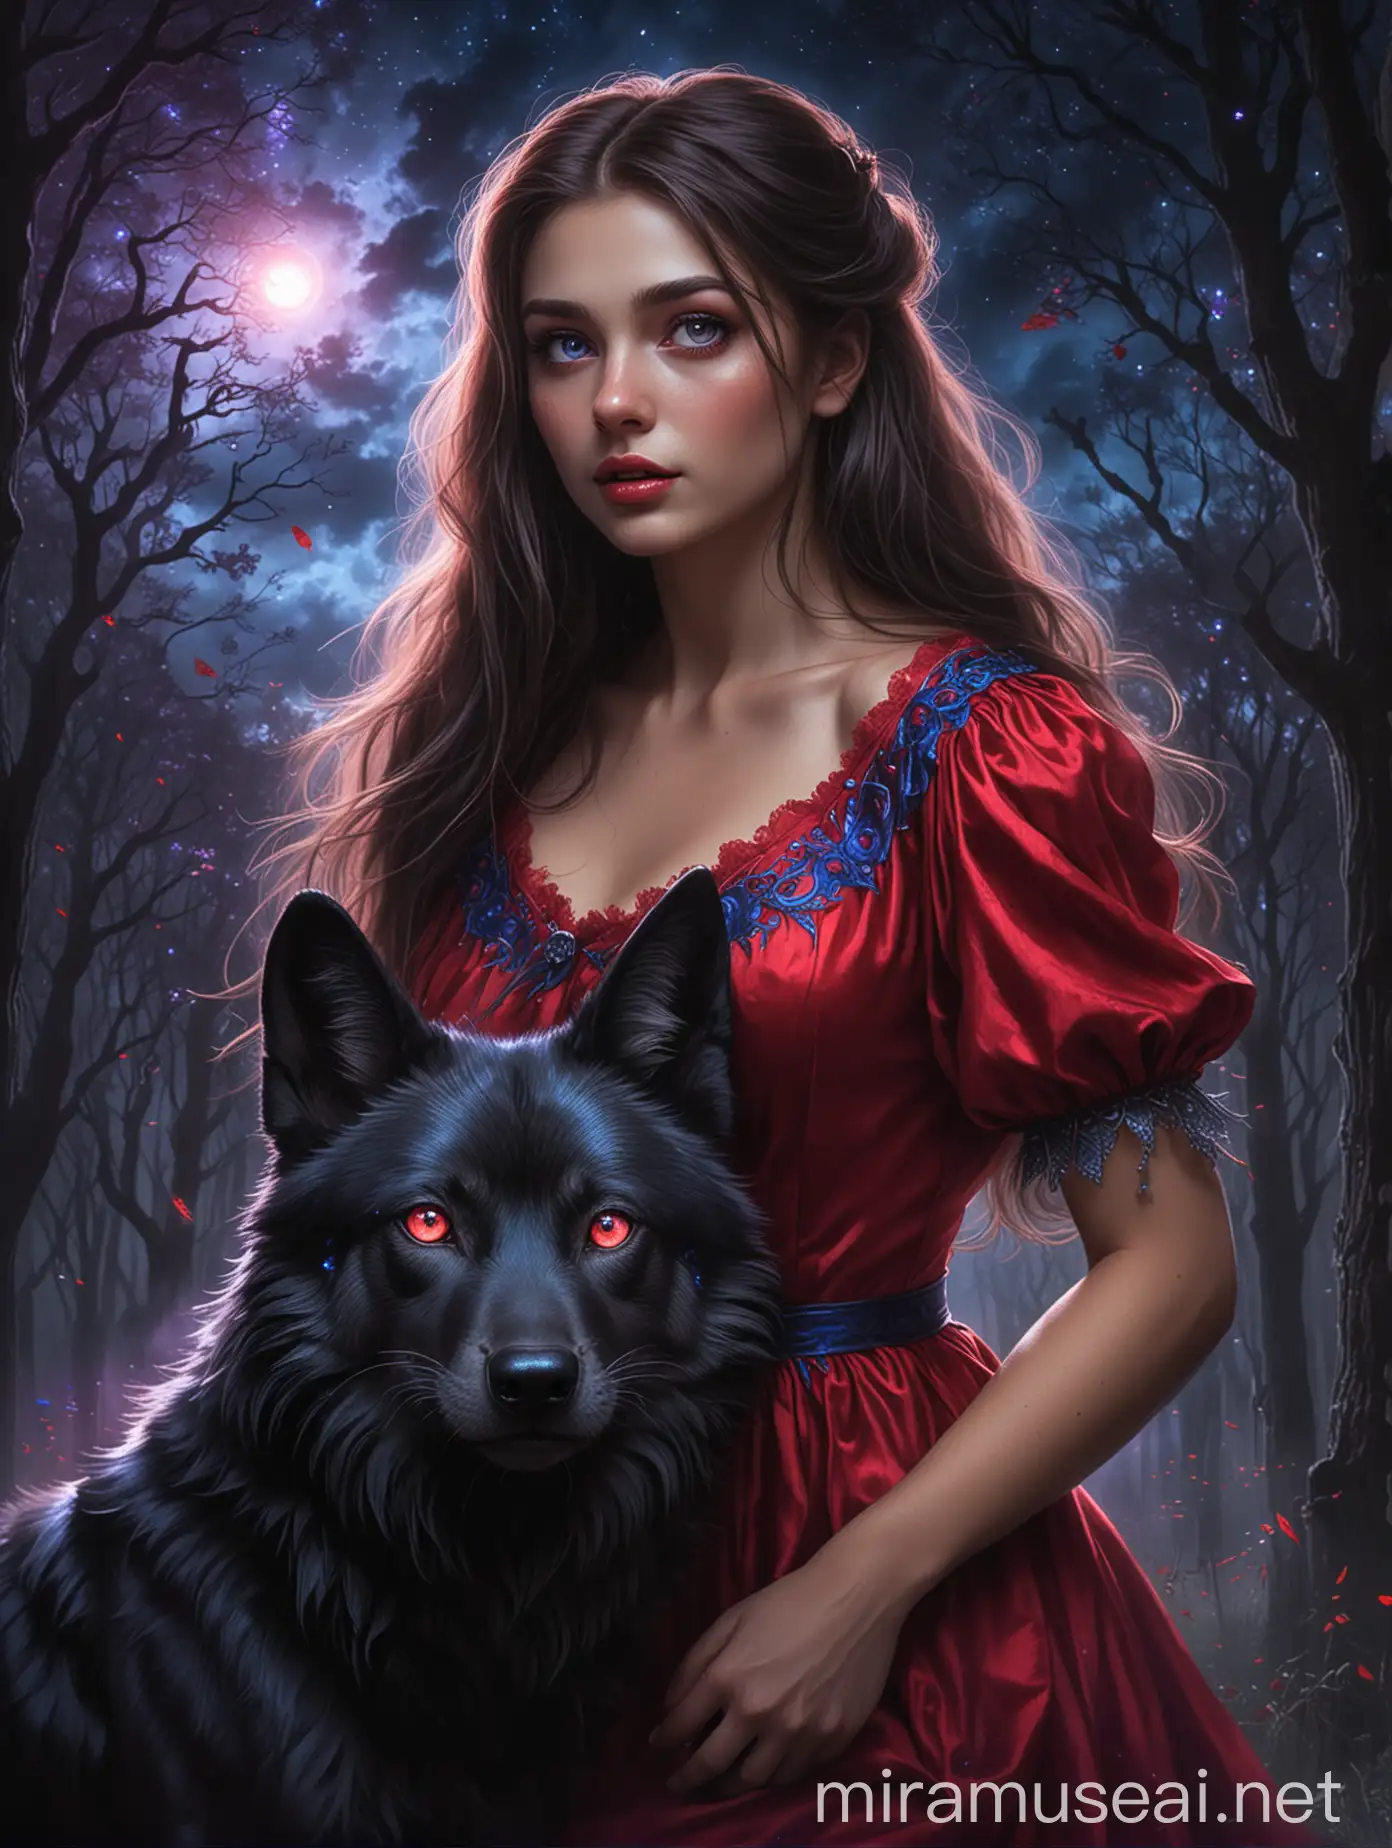 A beautiful lady in a red and blue dress, looking up to the sky with her glowing red and blue eyes, with a black wolf hiding in the dark with glowing purple eyes